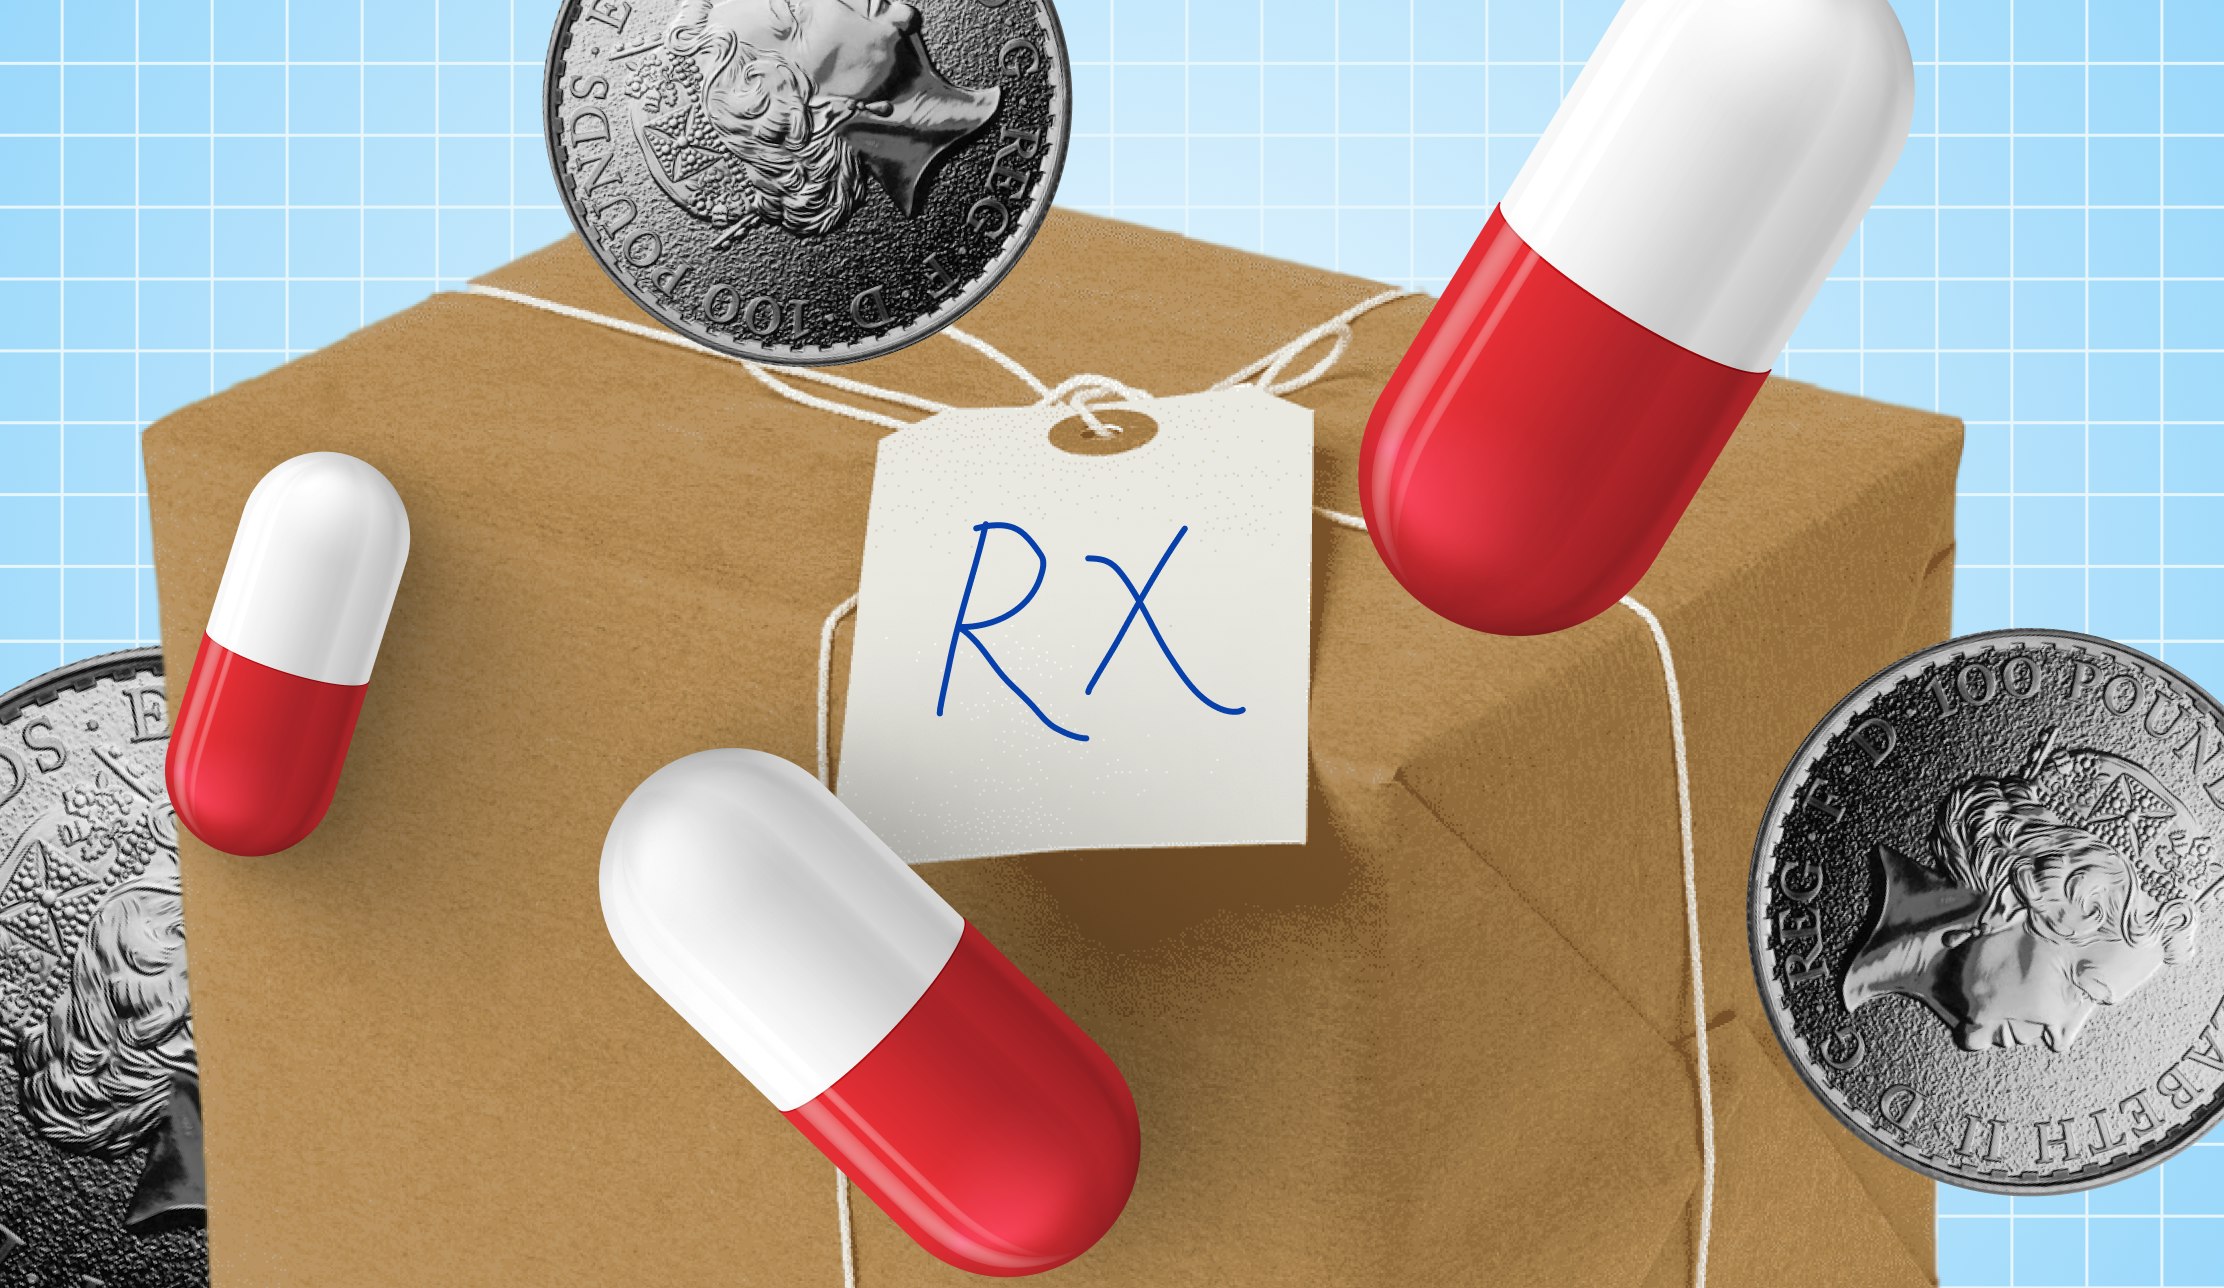 A parcel with a label that says "Rx". Medication pills and coins are floating around it.